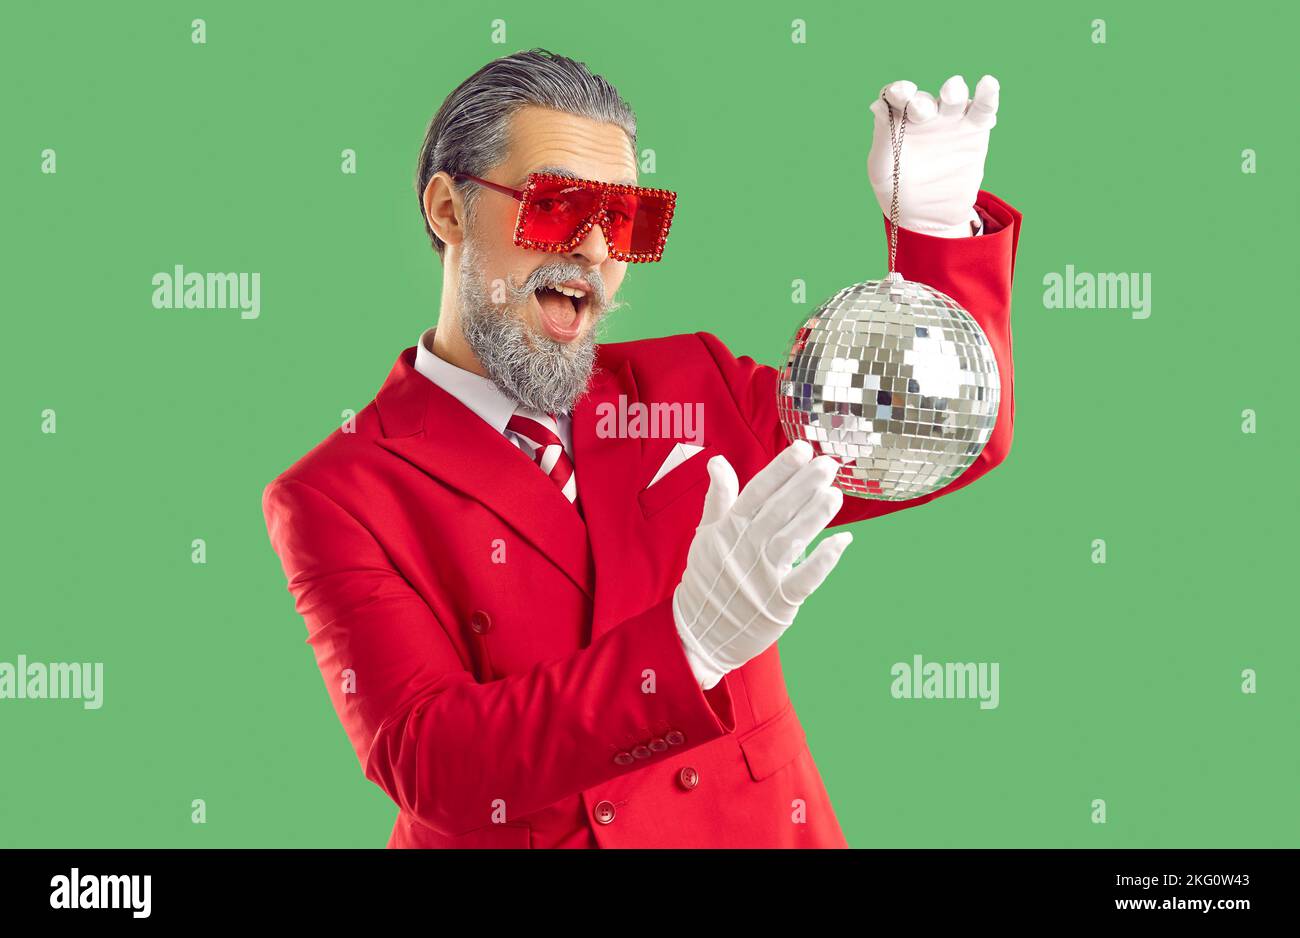 Extravagant smiling young man in a red suit and white gloves holds a shiny ball. Stock Photo